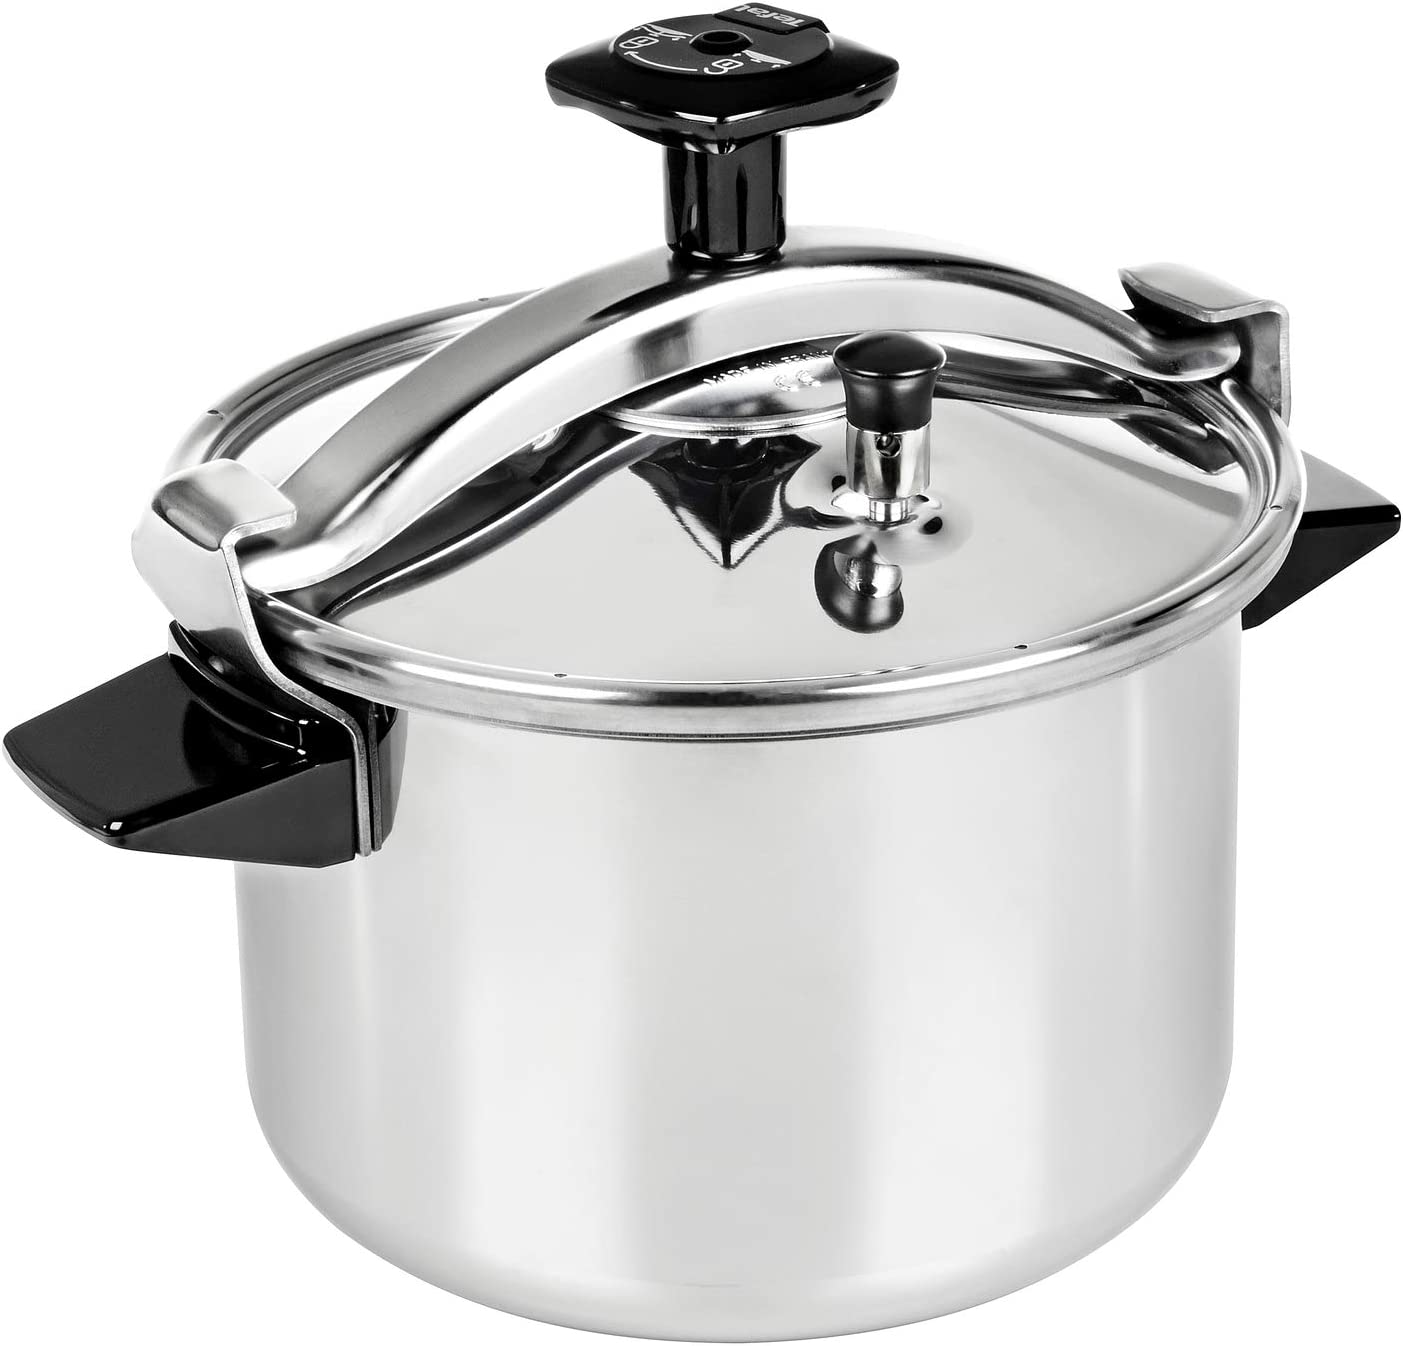 Cocotte SEB Minute A Induction 6L - Inox